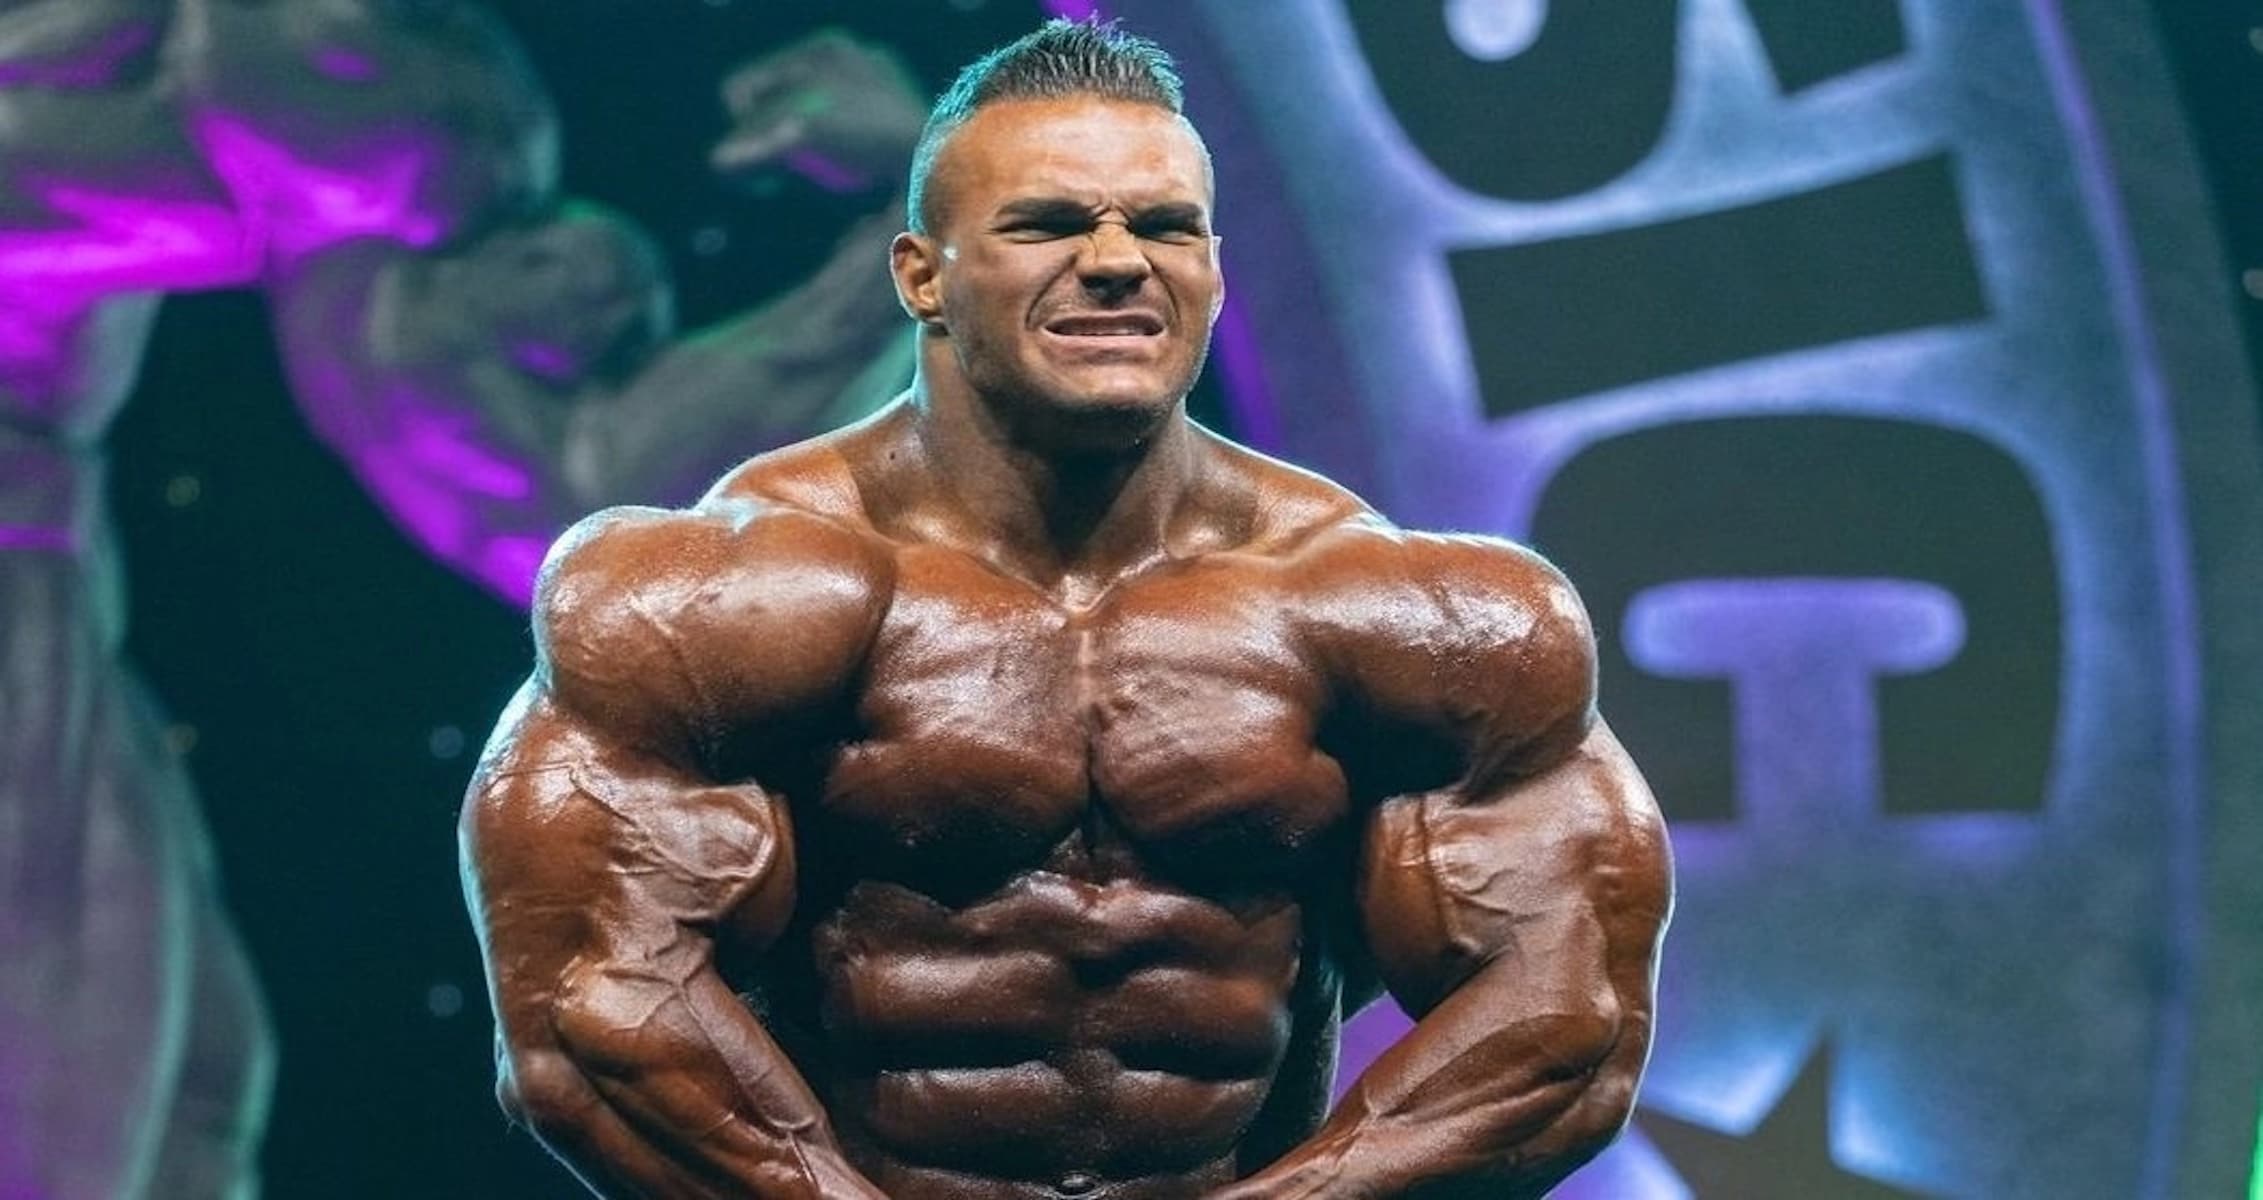 How Will The 2022 IFBB Men’s Open Schedule Play Out?